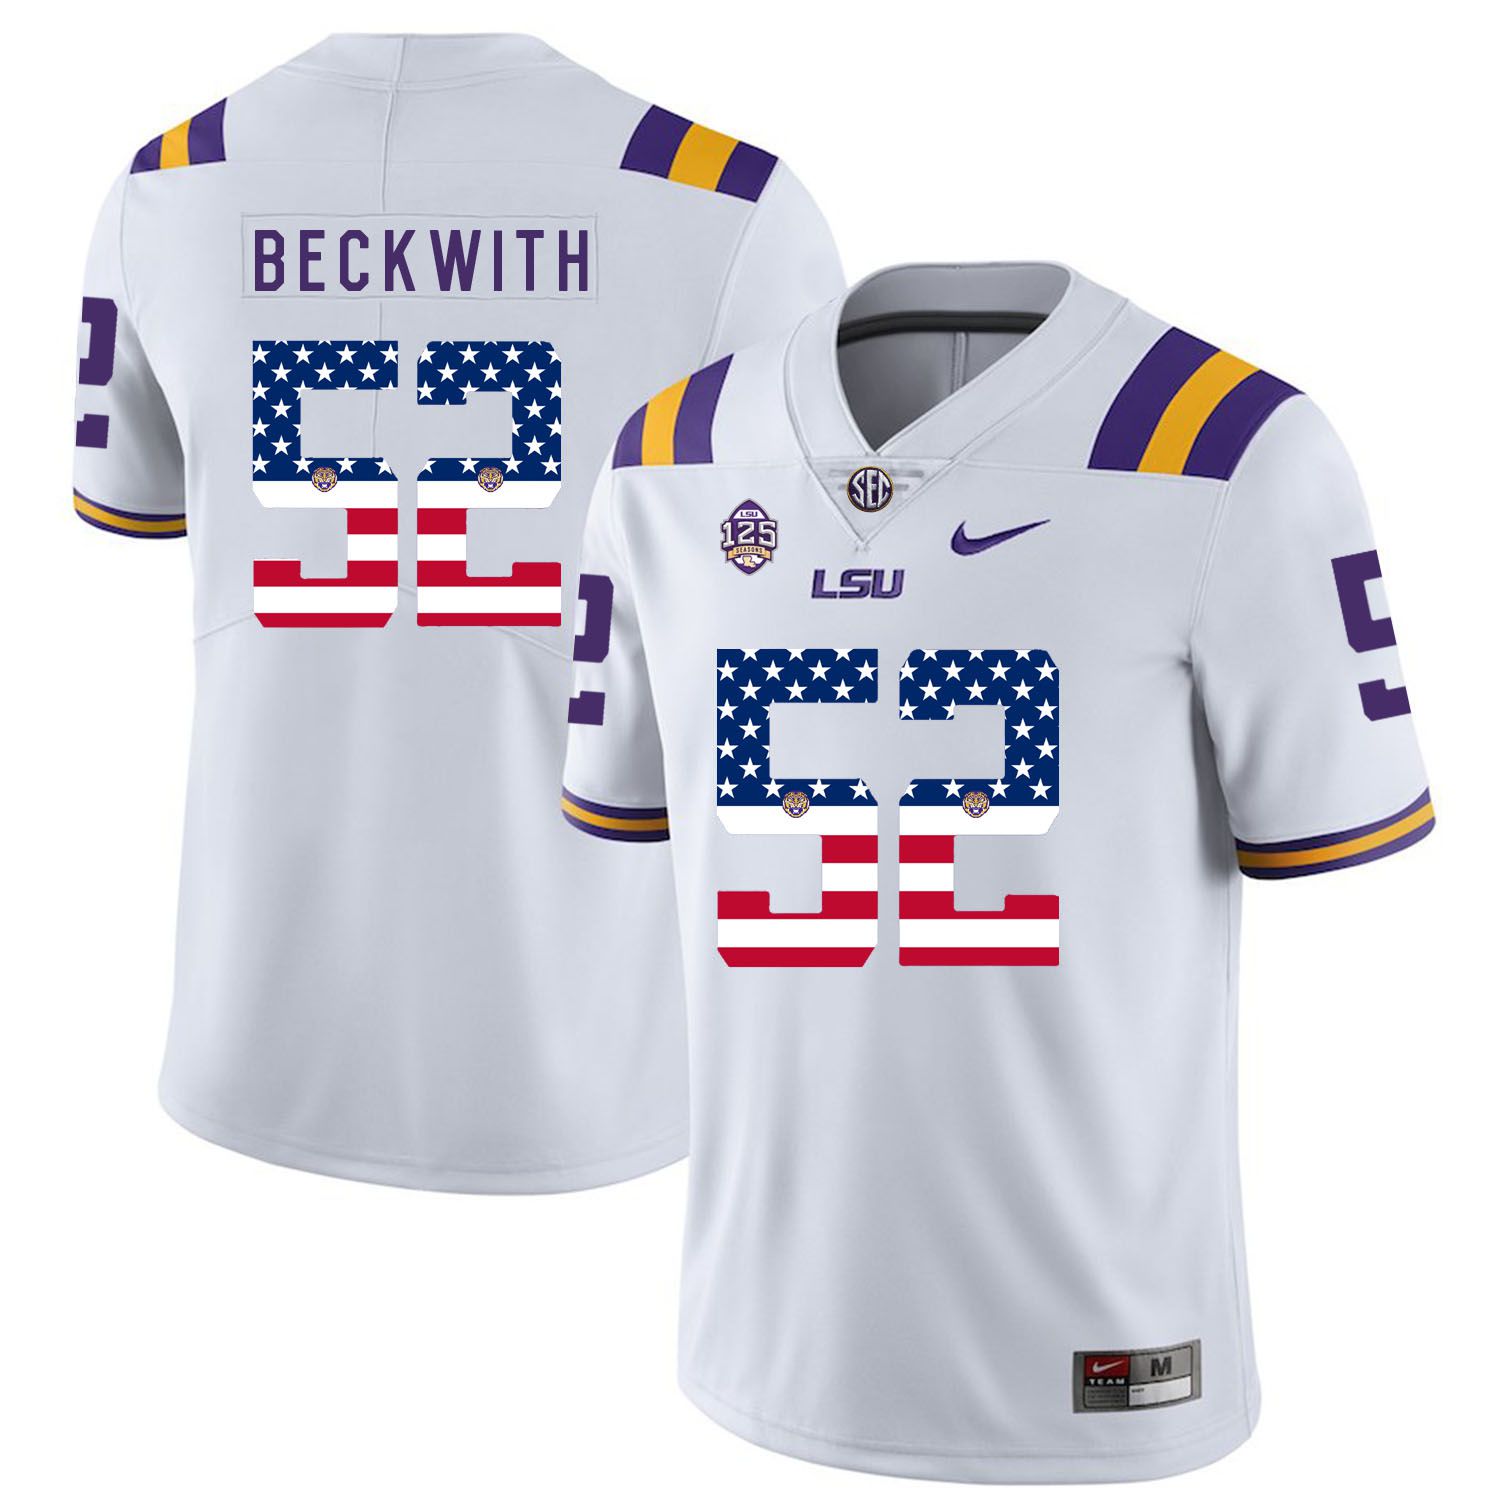 Men LSU Tigers 52 Beckwith White Flag Customized NCAA Jerseys